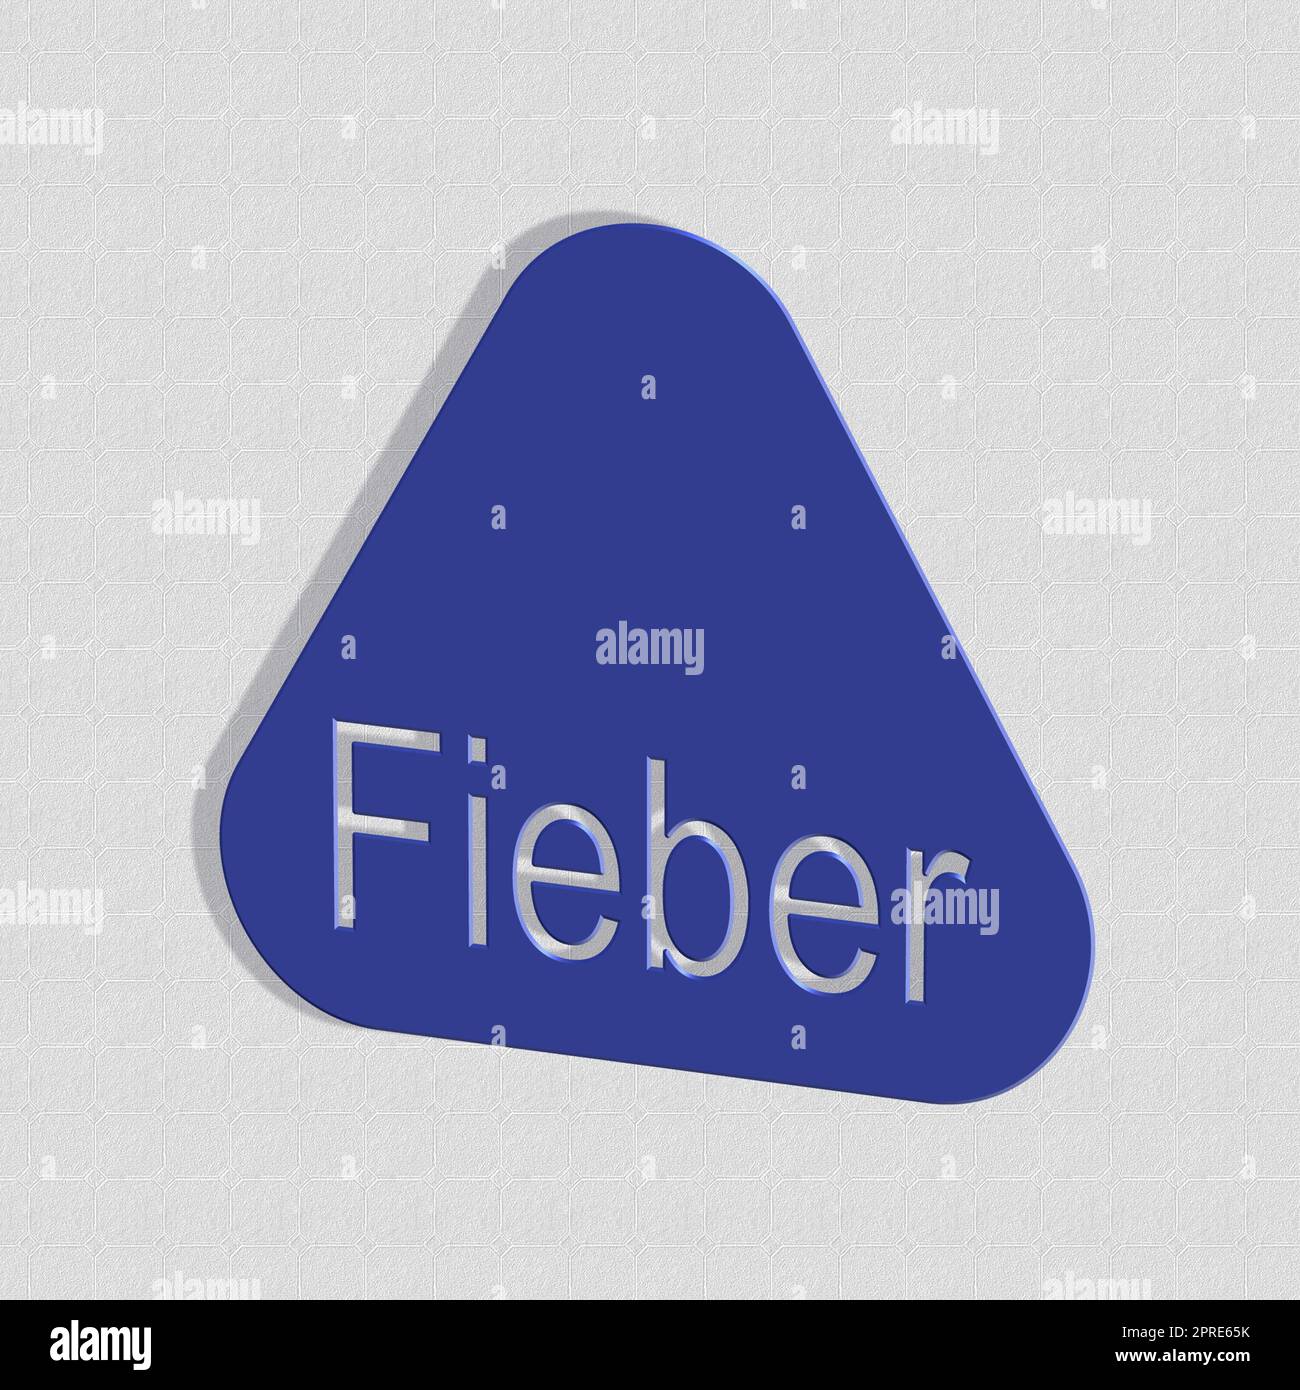 'Fieber' = 'Fever' - word, lettering or text as 3D illustration, 3D rendering, computer graphics Stock Photo